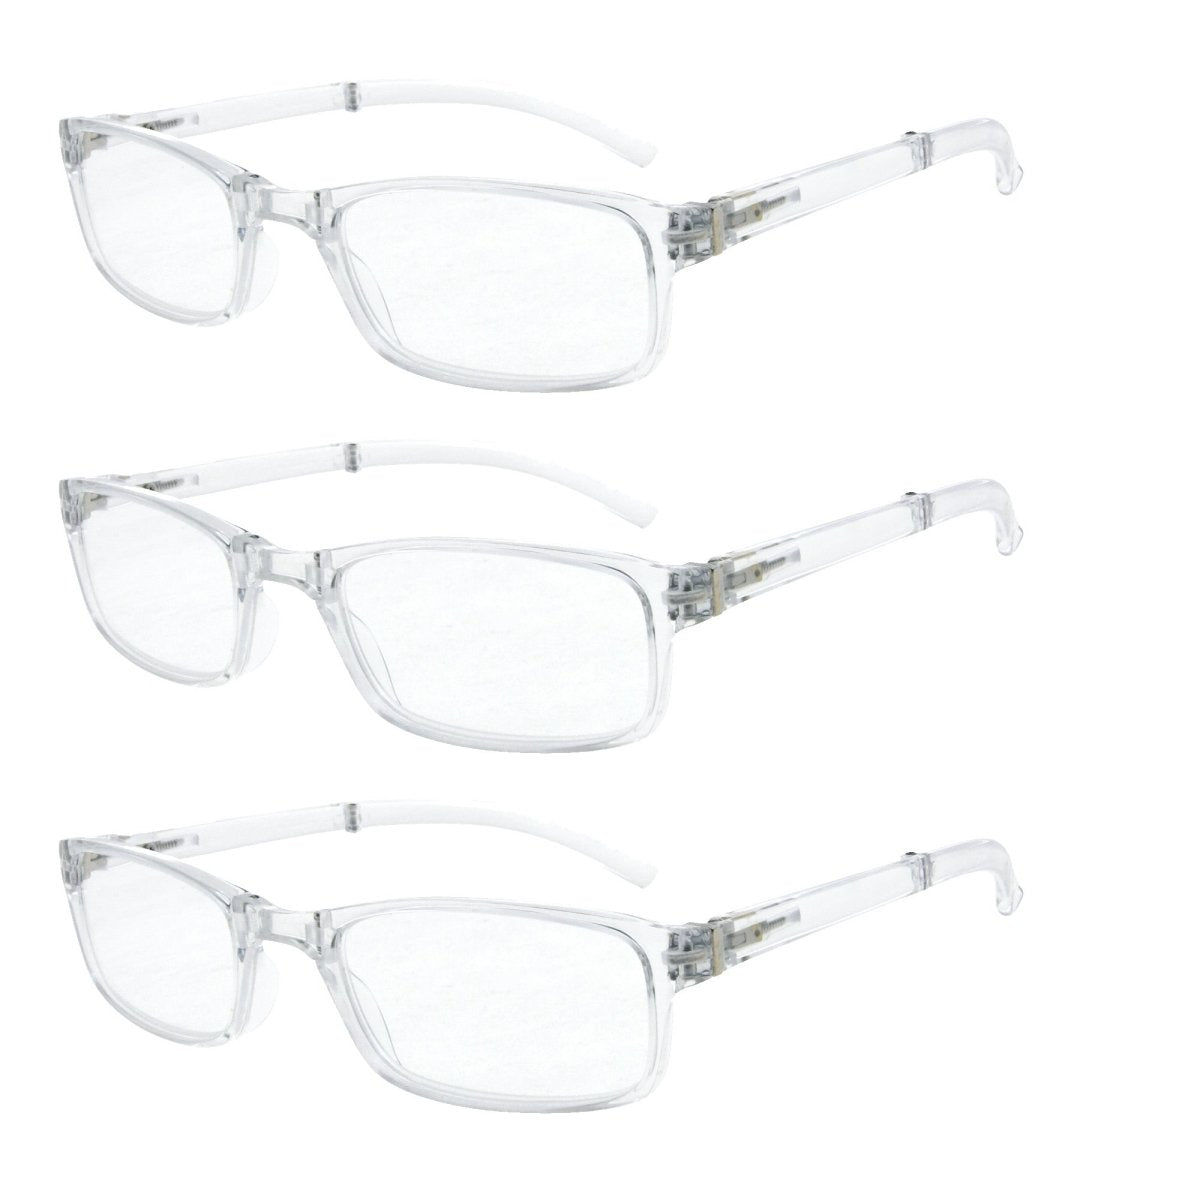 Stylish Foldable Reading Glasses Clear R123